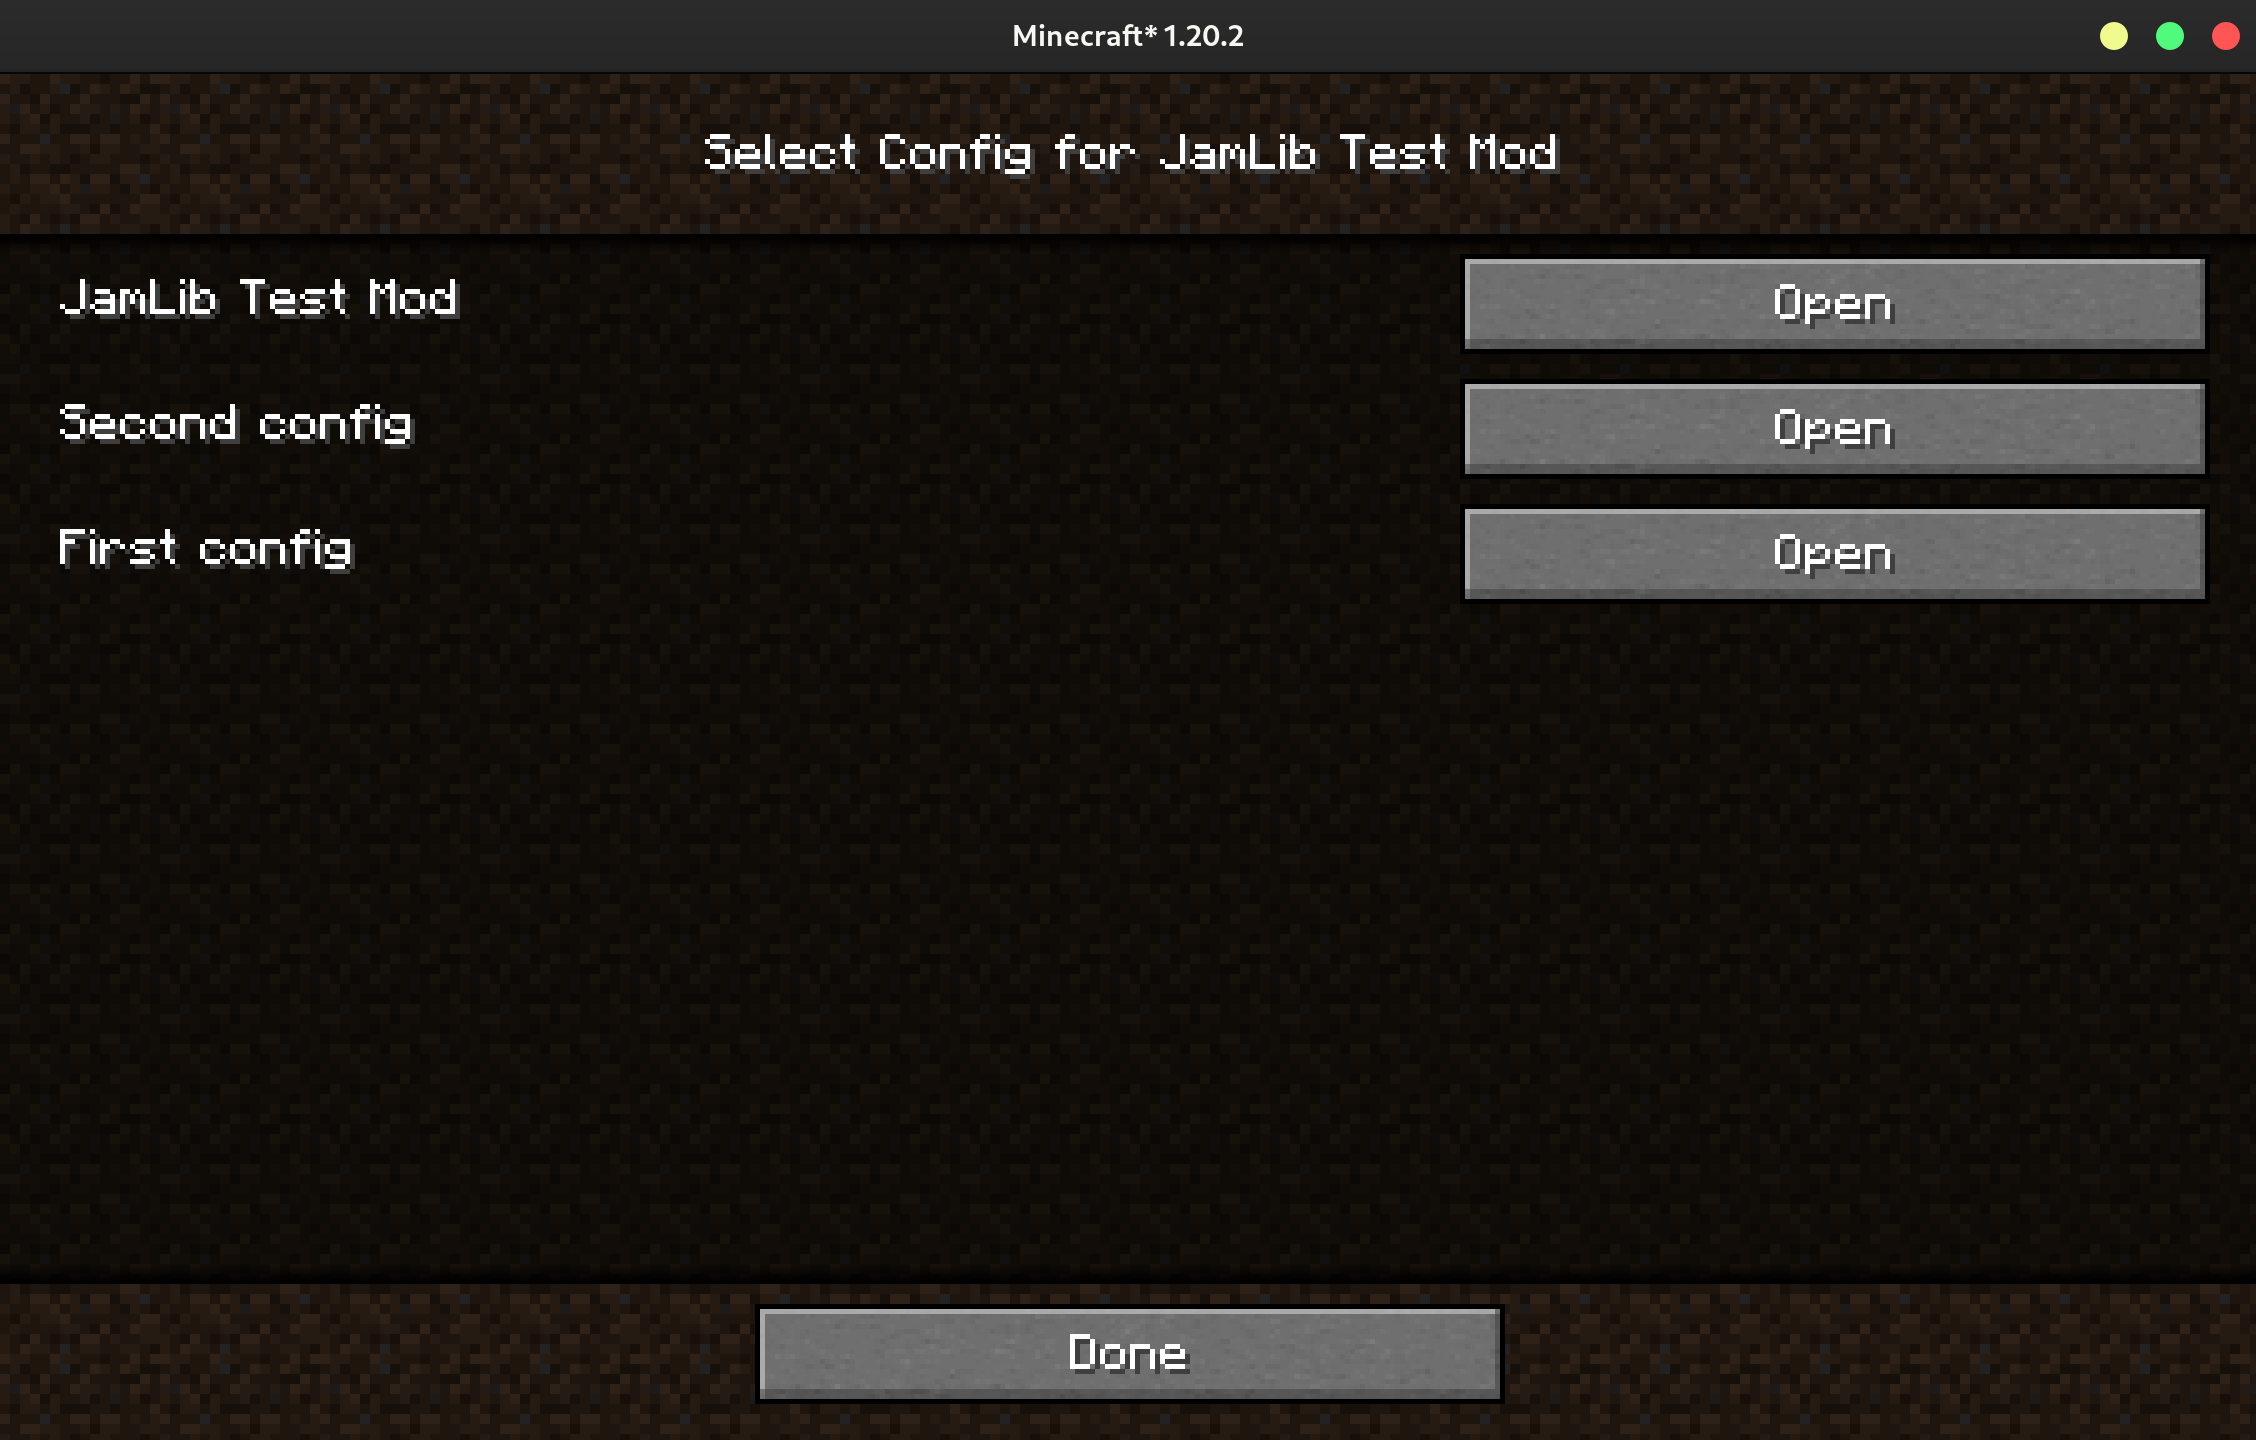 A screen allowing the user to select which config they want to edit